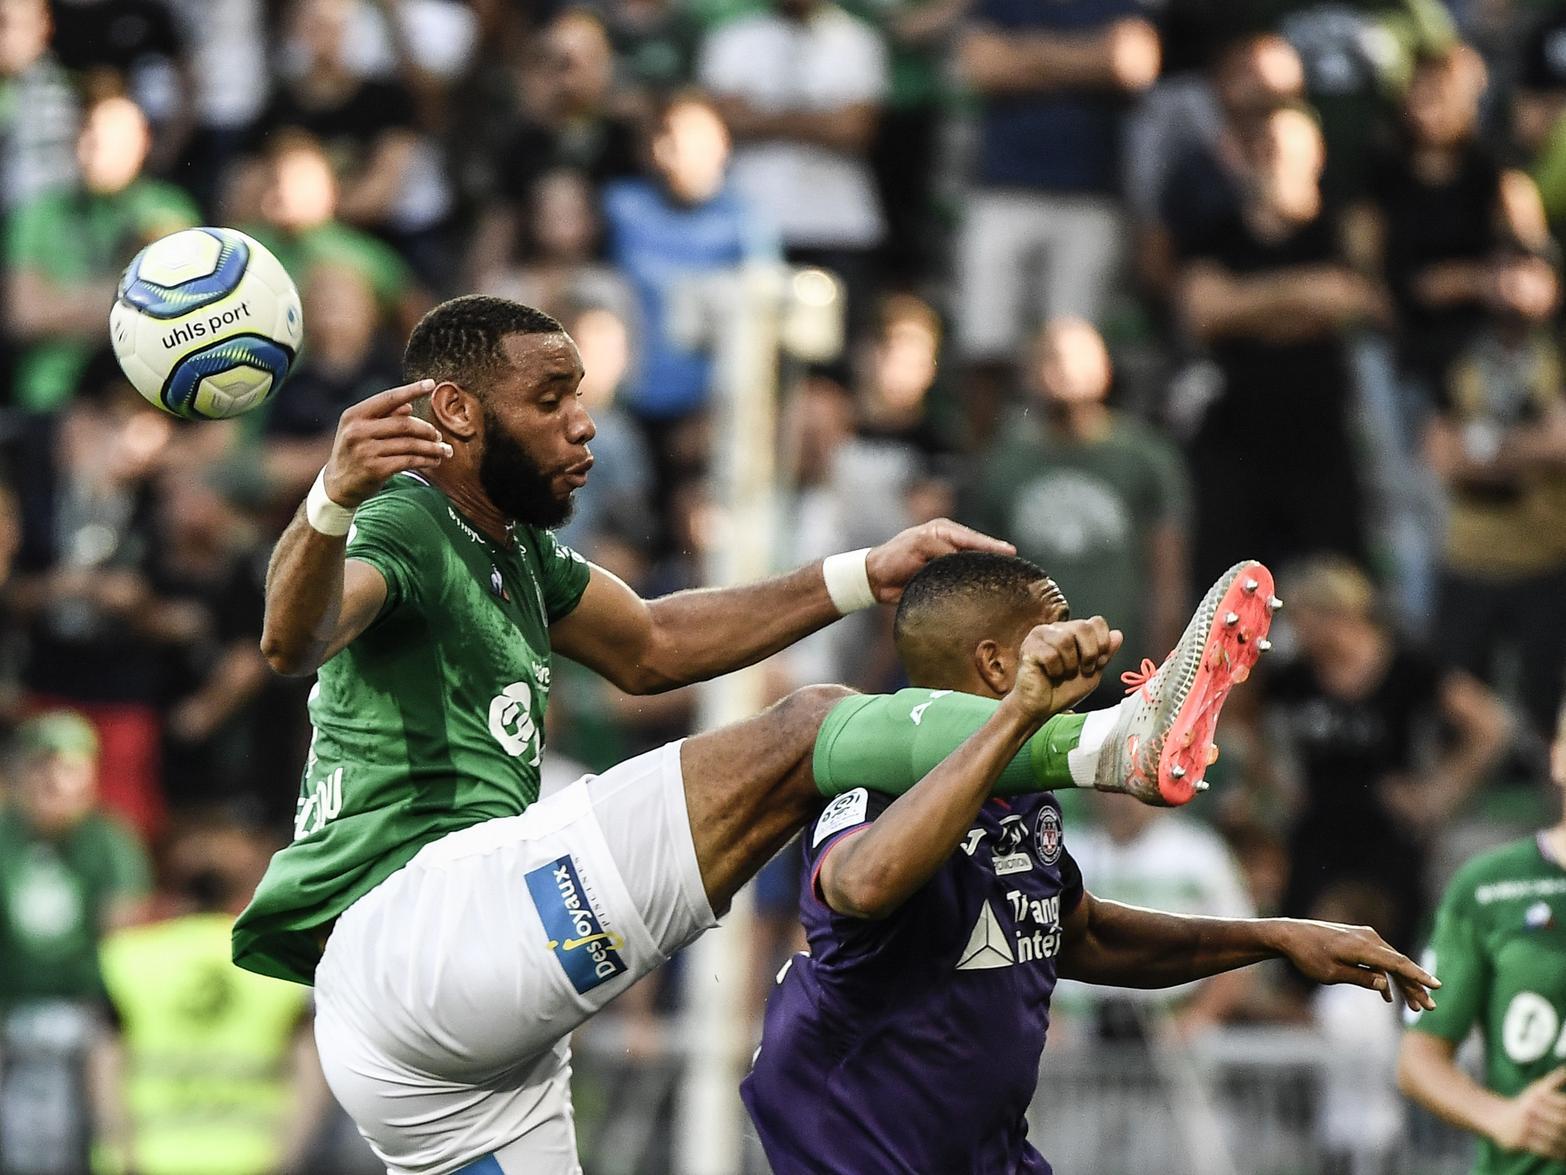 West Bromwich Albion and Derby County are said to have joined a three-way scrap for St Etienne defender Harold Moukoudi, who has been capped at senior level by Cameroon. (L'Equipe)